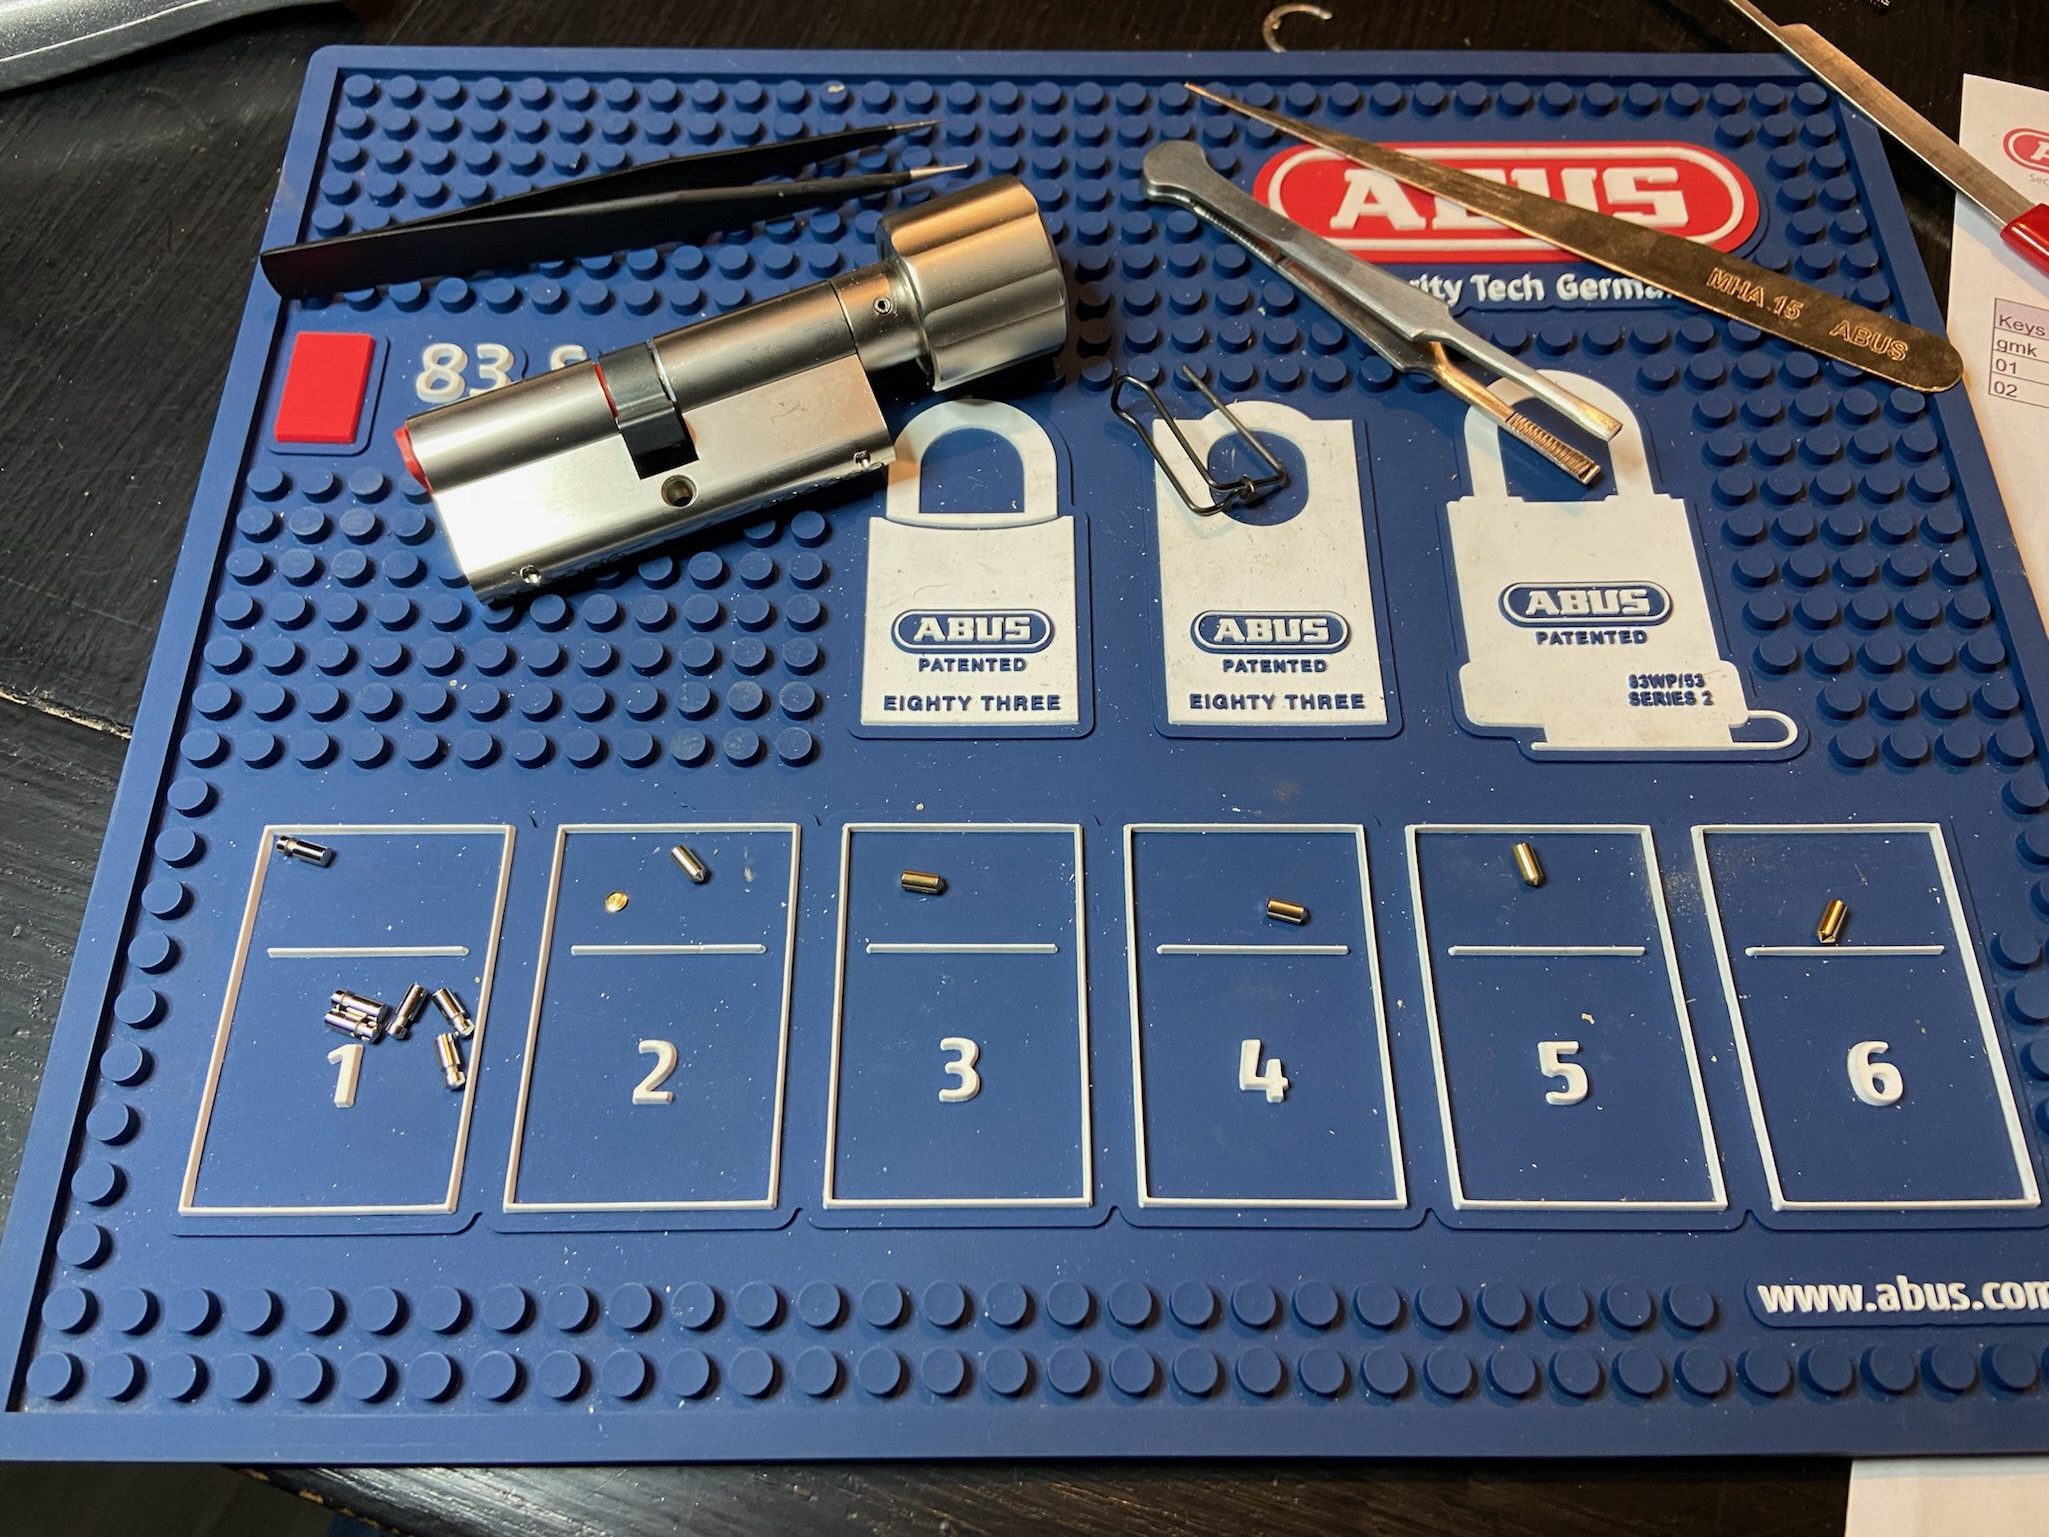 Master Key suites by pick me locksmith using Abus zolit cylinders 